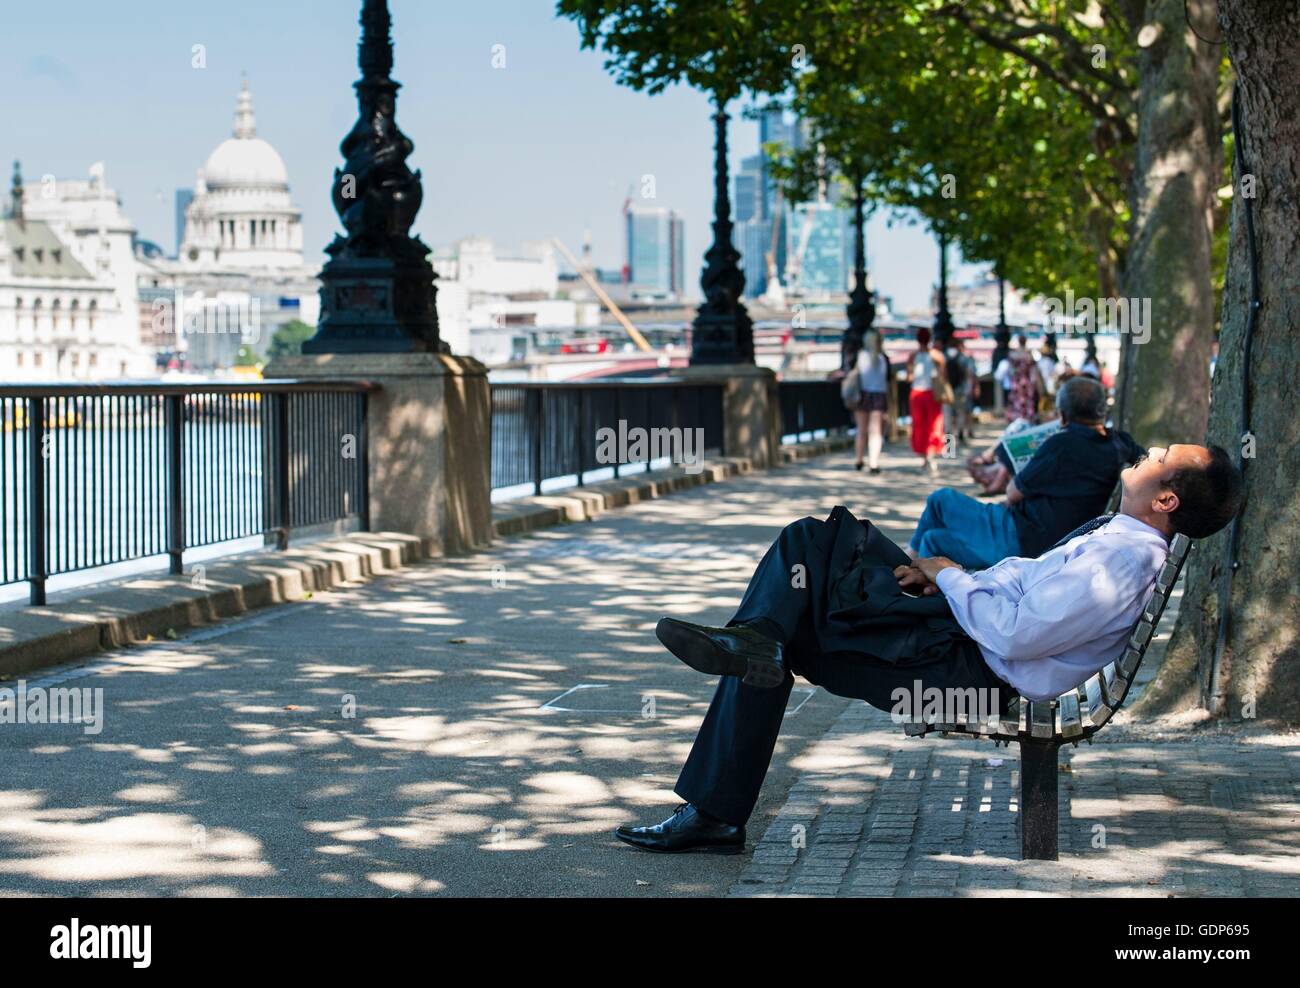 A man enjoys the hot weather along the Southbank in London, as Britain has sweltered on the hottest day of the year so far, with soaring temperatures sparking a surge in calls for medical help and causing delays on the railway. Stock Photo